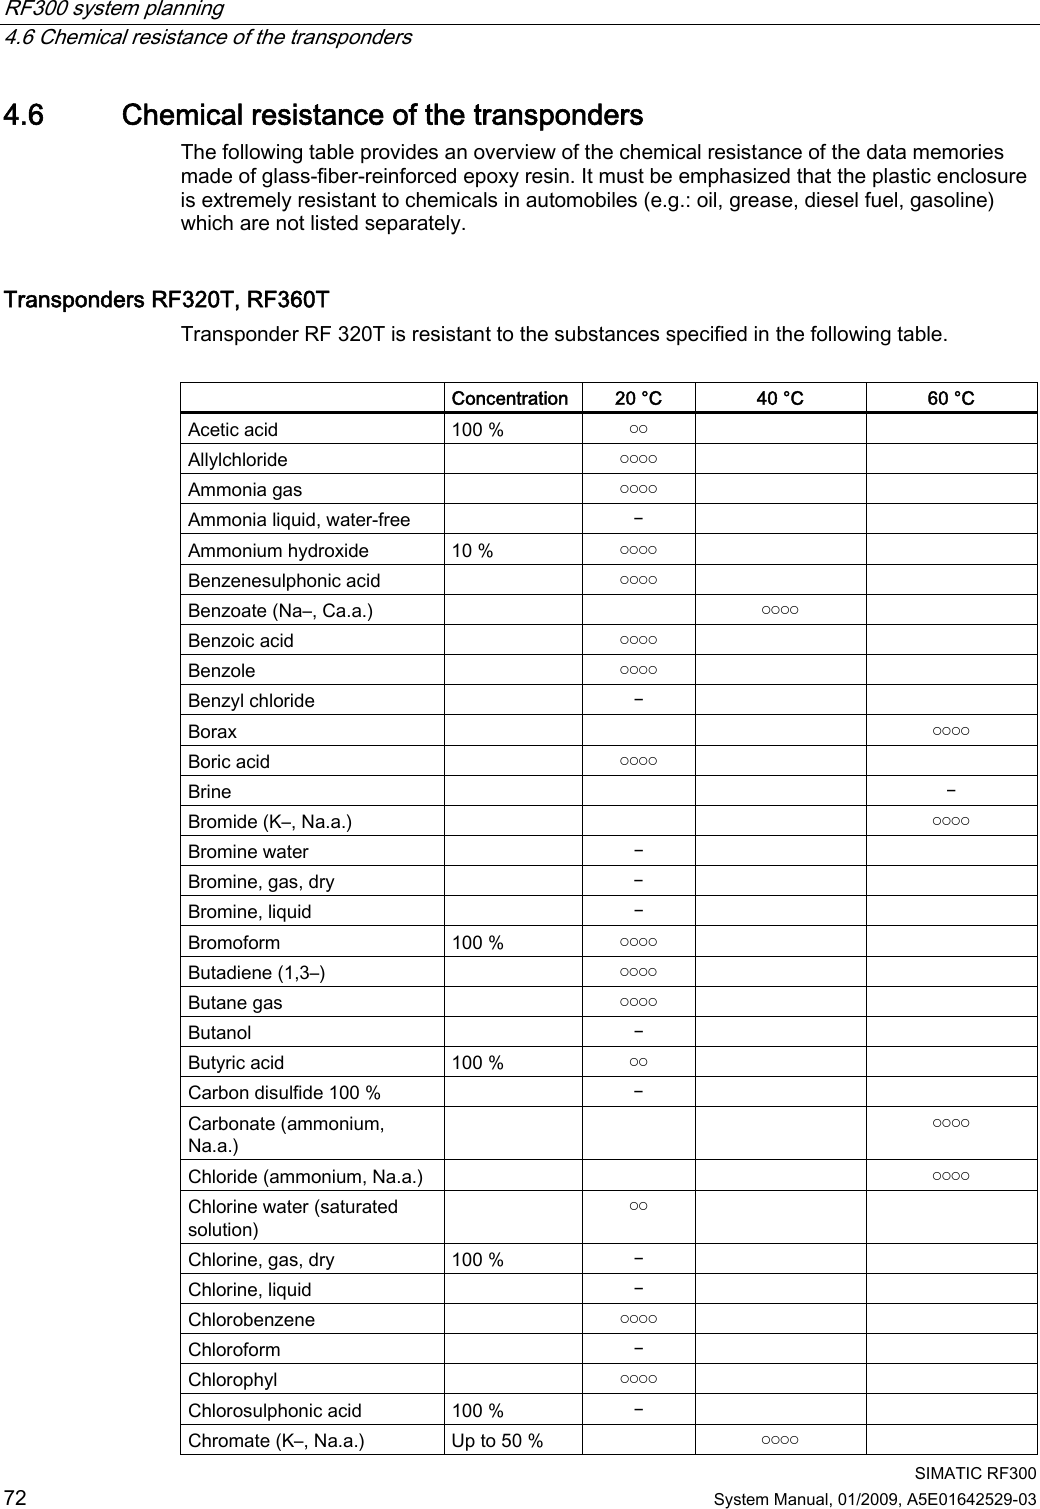 RF300 system planning   4.6 Chemical resistance of the transponders  SIMATIC RF300 72 System Manual, 01/2009, A5E01642529-03 4.6 Chemical resistance of the transponders The following table provides an overview of the chemical resistance of the data memories made of glass-fiber-reinforced epoxy resin. It must be emphasized that the plastic enclosure is extremely resistant to chemicals in automobiles (e.g.: oil, grease, diesel fuel, gasoline) which are not listed separately.  Transponders RF320T, RF360T Transponder RF 320T is resistant to the substances specified in the following table.    Concentration  20 °C  40 °C  60 °C Acetic acid  100 %  ￮￮     Allylchloride    ￮￮￮￮     Ammonia gas    ￮￮￮￮     Ammonia liquid, water-free    ￚ     Ammonium hydroxide  10 %  ￮￮￮￮     Benzenesulphonic acid    ￮￮￮￮     Benzoate (Na–, Ca.a.)      ￮￮￮￮   Benzoic acid    ￮￮￮￮     Benzole    ￮￮￮￮     Benzyl chloride    ￚ     Borax        ￮￮￮￮ Boric acid    ￮￮￮￮     Brine        ￚ Bromide (K–, Na.a.)        ￮￮￮￮ Bromine water    ￚ     Bromine, gas, dry    ￚ     Bromine, liquid    ￚ     Bromoform  100 %  ￮￮￮￮     Butadiene (1,3–)    ￮￮￮￮     Butane gas    ￮￮￮￮     Butanol    ￚ     Butyric acid  100 %  ￮￮     Carbon disulfide 100 %    ￚ     Carbonate (ammonium, Na.a.)       ￮￮￮￮ Chloride (ammonium, Na.a.)        ￮￮￮￮ Chlorine water (saturated solution)   ￮￮     Chlorine, gas, dry  100 %  ￚ     Chlorine, liquid    ￚ     Chlorobenzene    ￮￮￮￮     Chloroform    ￚ     Chlorophyl    ￮￮￮￮     Chlorosulphonic acid  100 %  ￚ     Chromate (K–, Na.a.)  Up to 50 %    ￮￮￮￮   